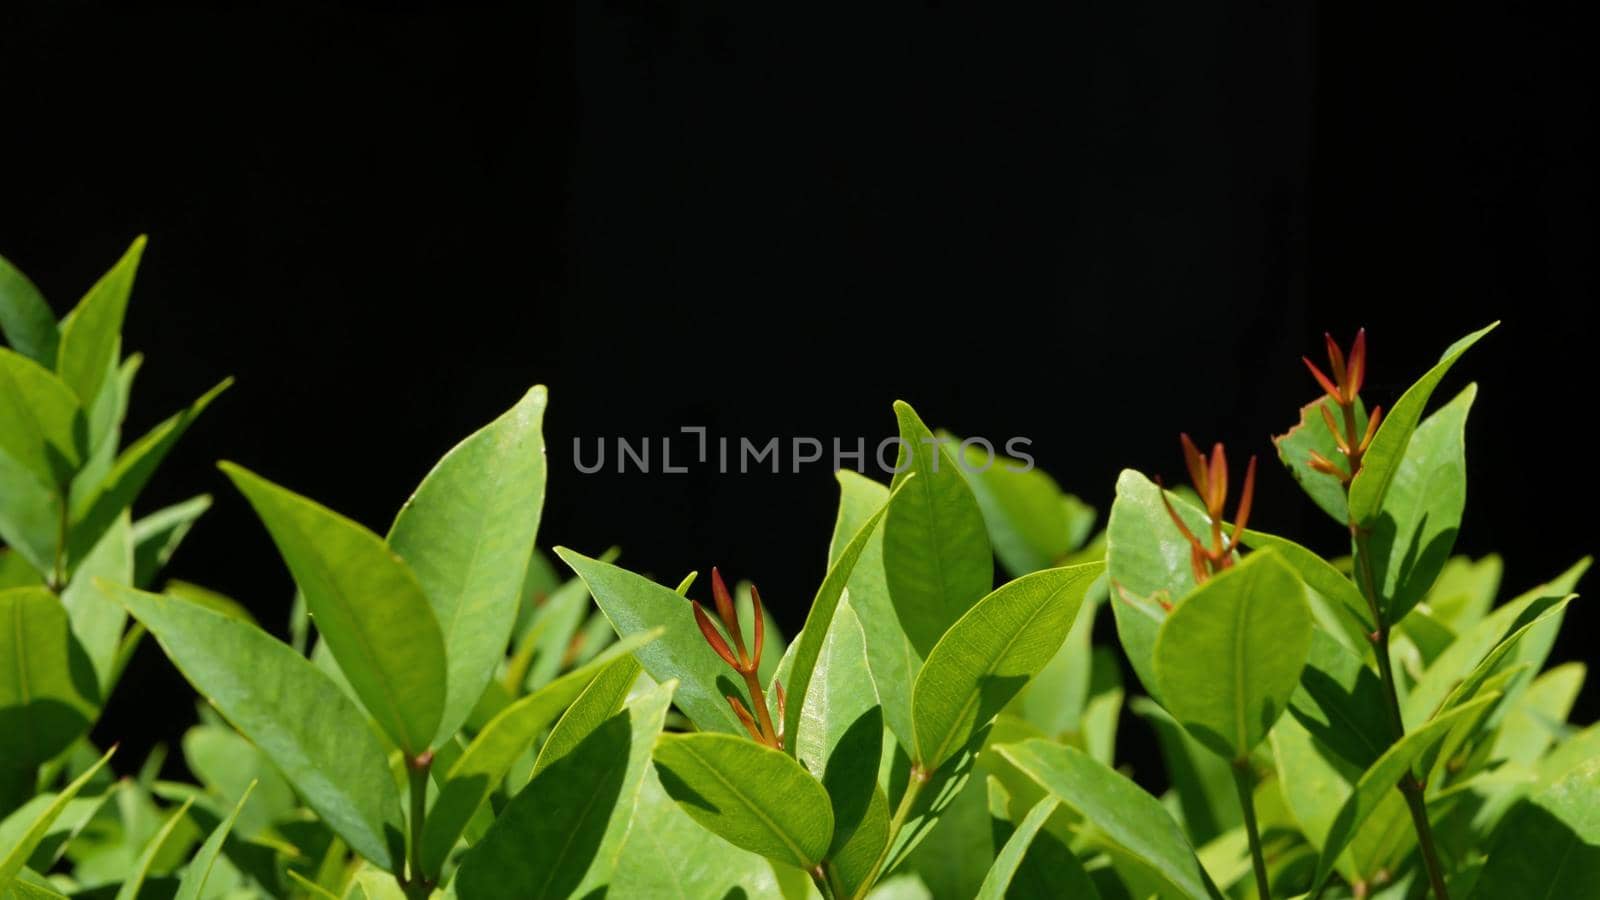 Green plant growing on plantation. Plant with green leaves growing on plantation against black background